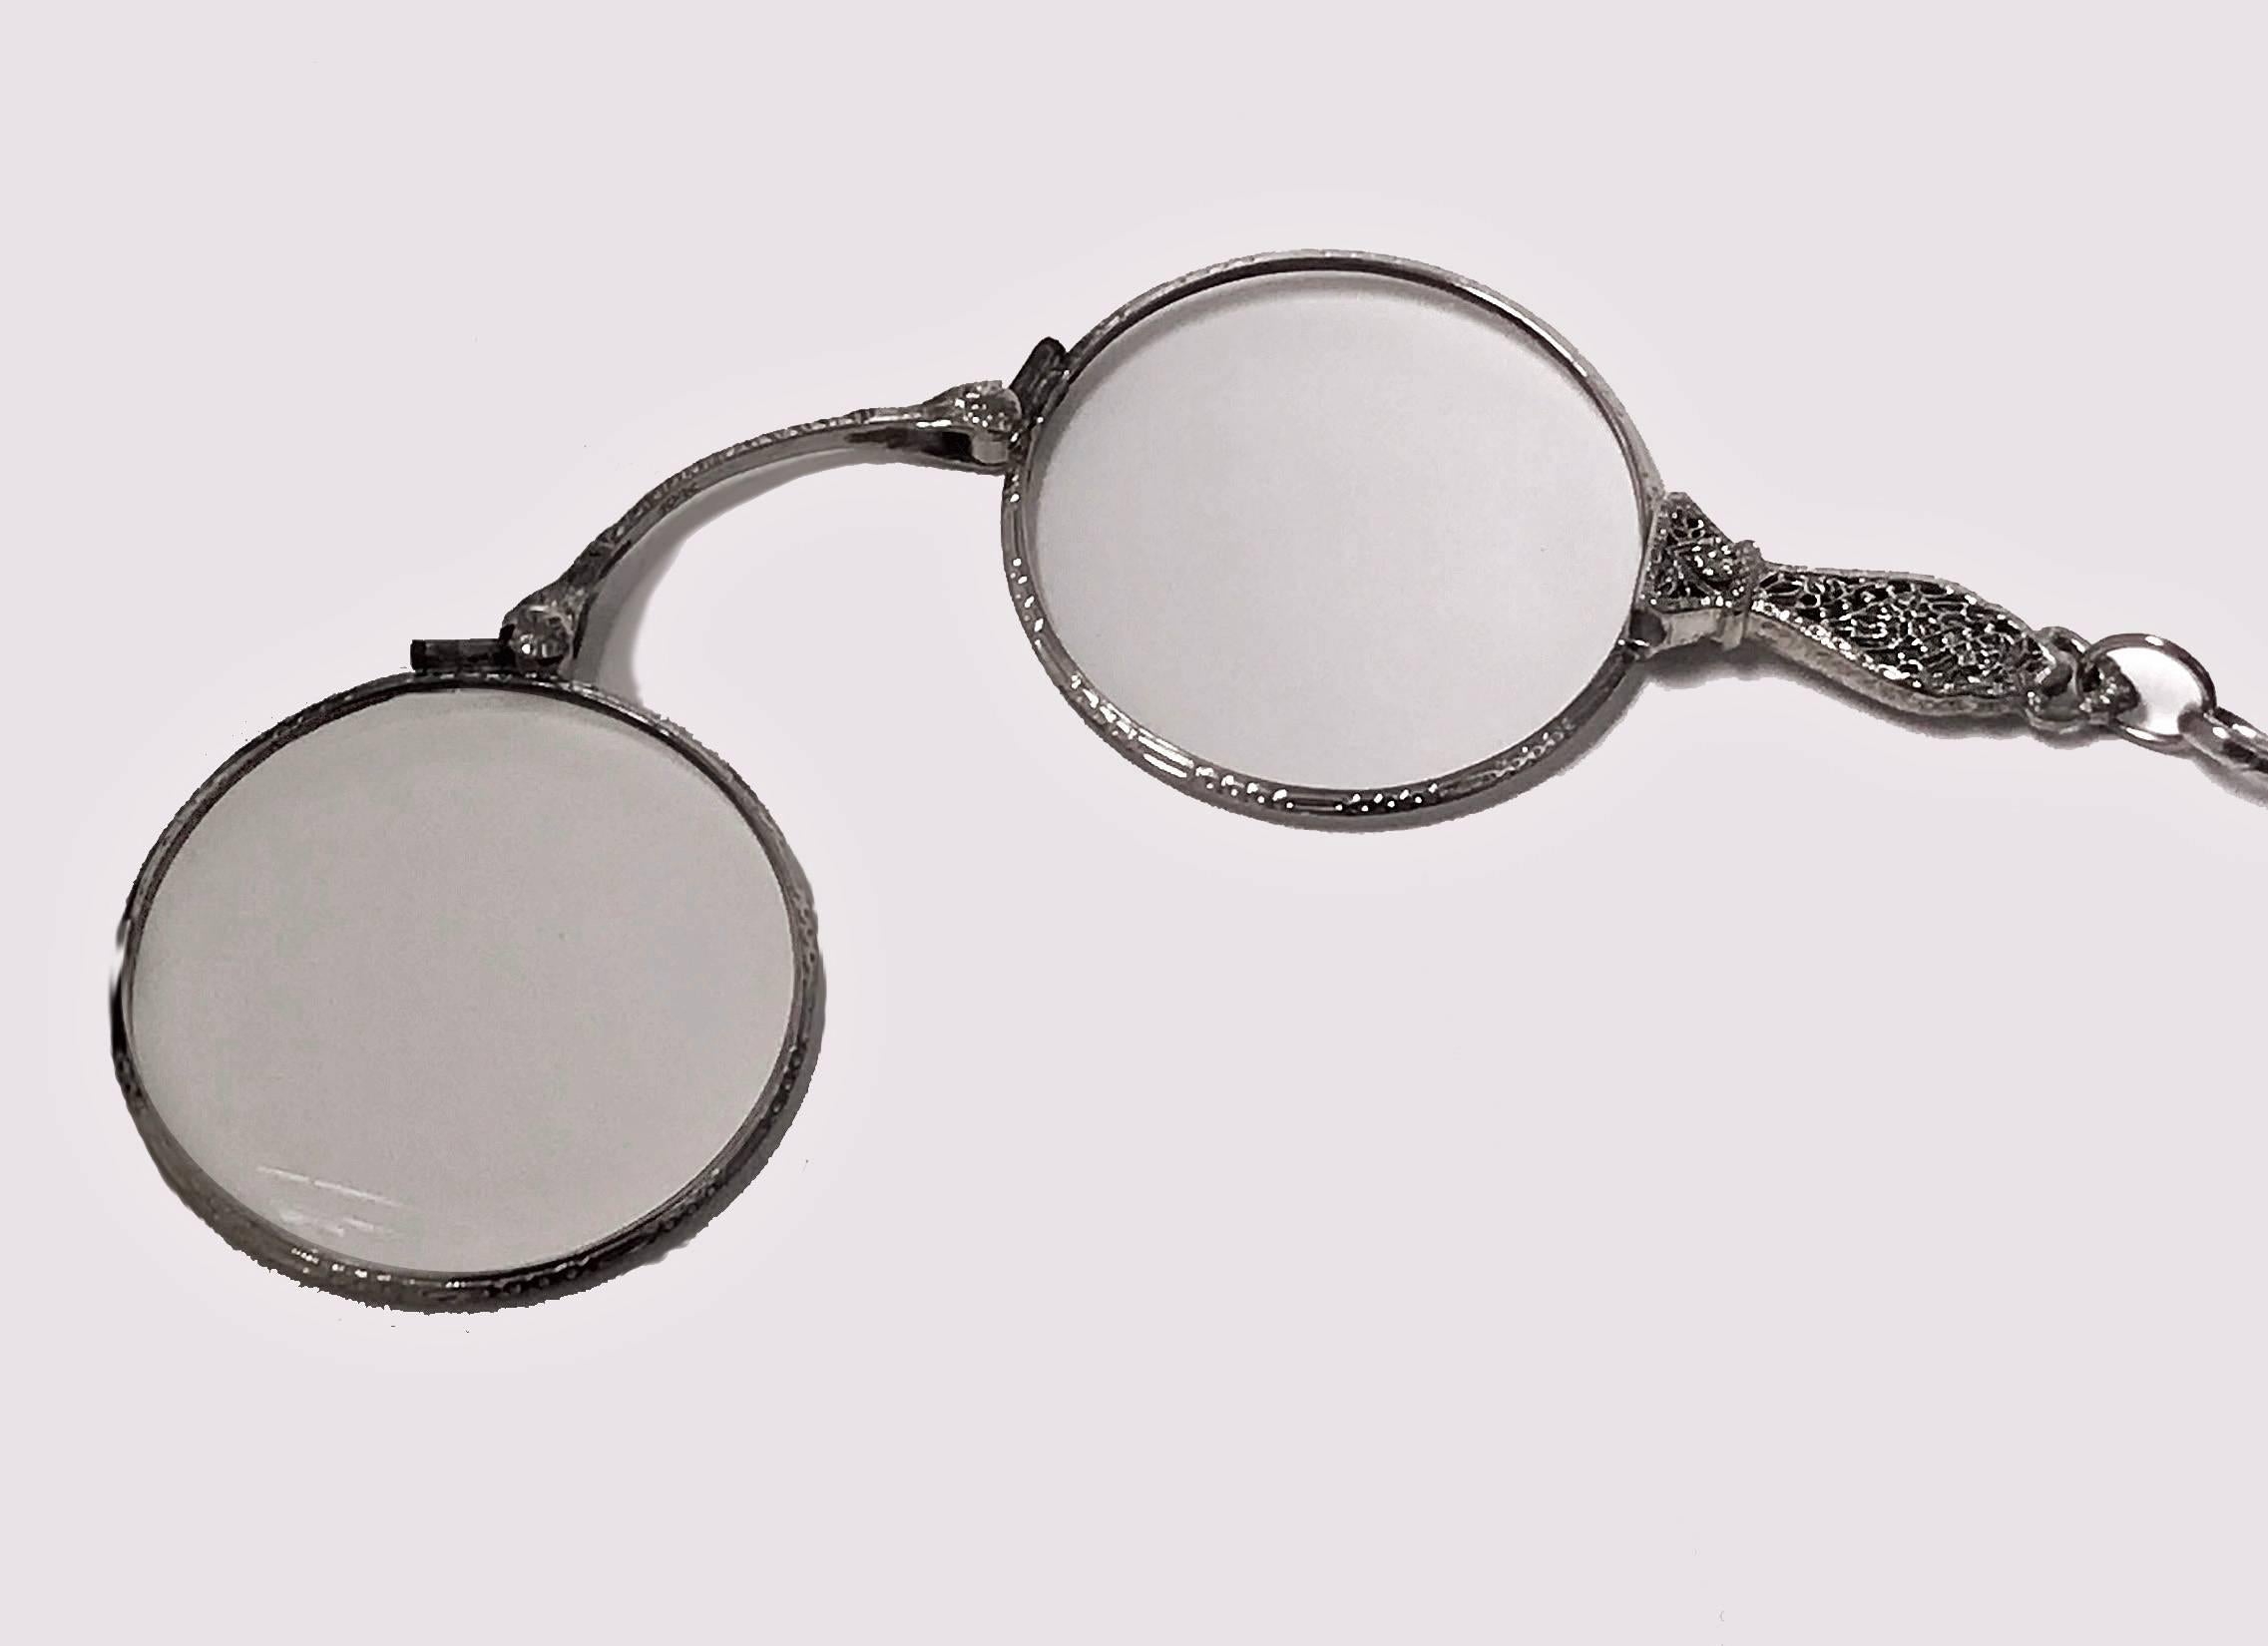 Pair of Gold Lorgnettes, C. 1920, 10K white gold, pierced filigree handle, engraved decoration surround to lenses, stamped 10K. Good spring mechanism, sturdy and fold nicely. Lenses unscrew to allow for different magnification. Open measurements: 4